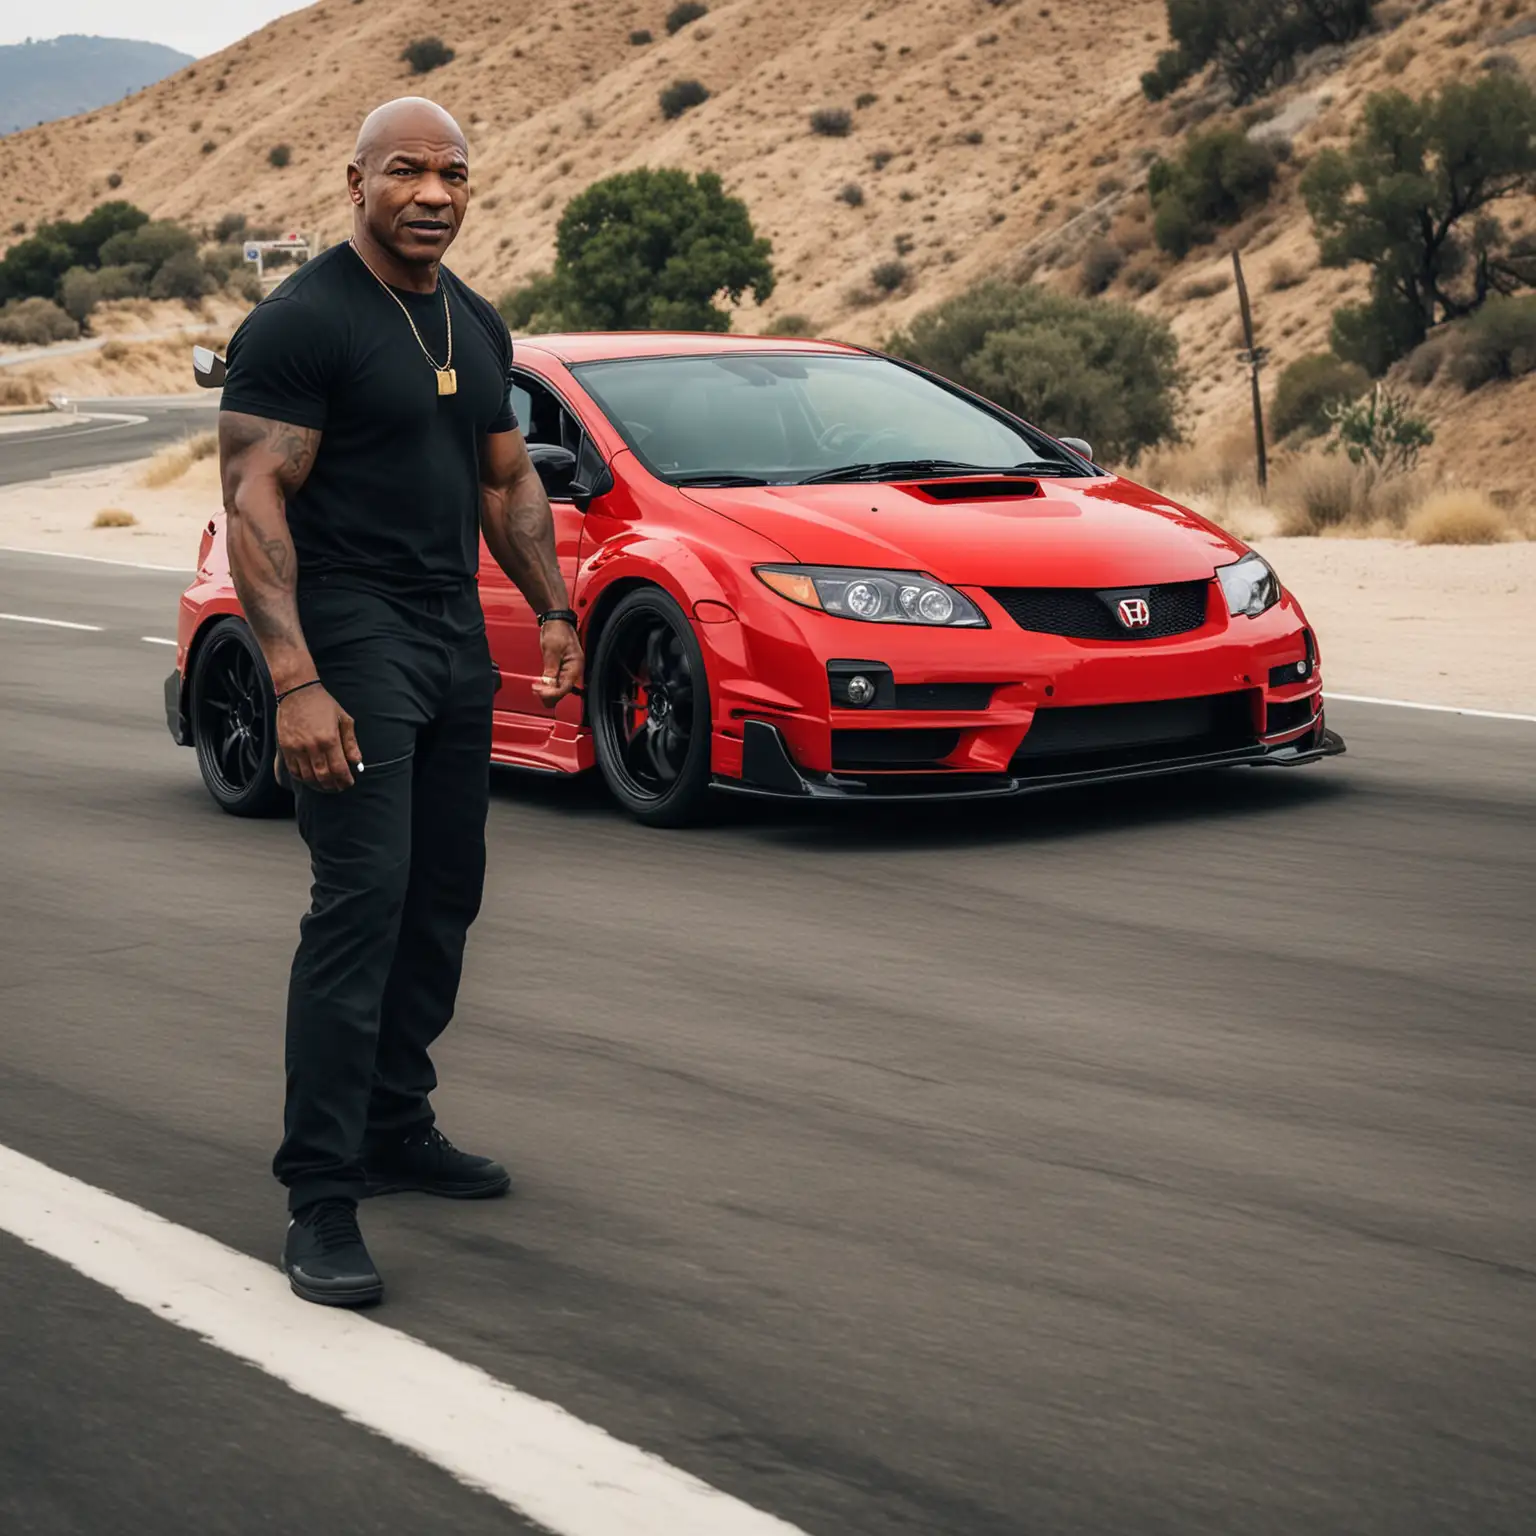 mike tyson driving a honda civic type r has a red color and black rims. on street racing in california highway